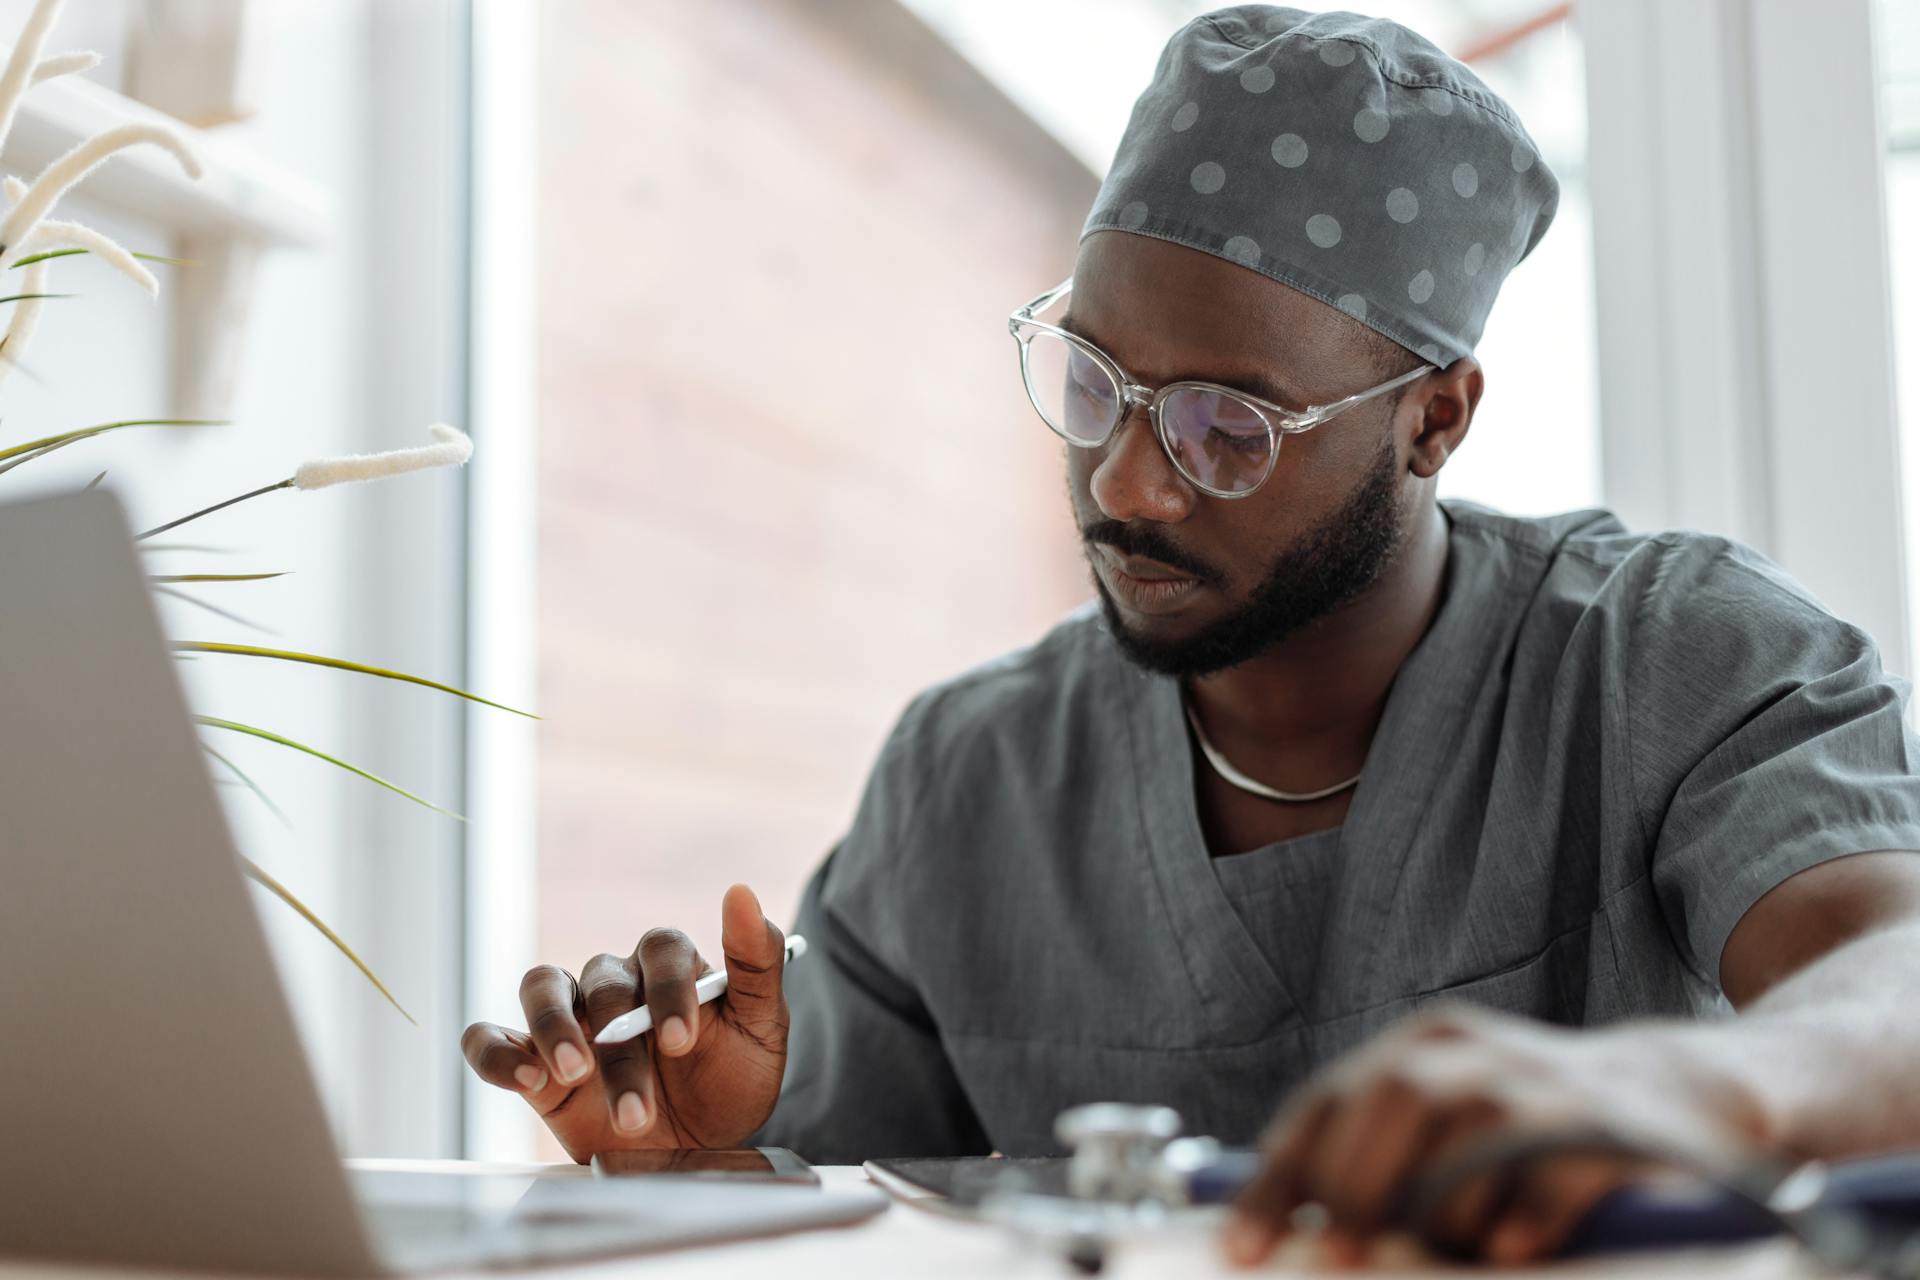 A medical practitioner working on his laptop | Source: Pexels